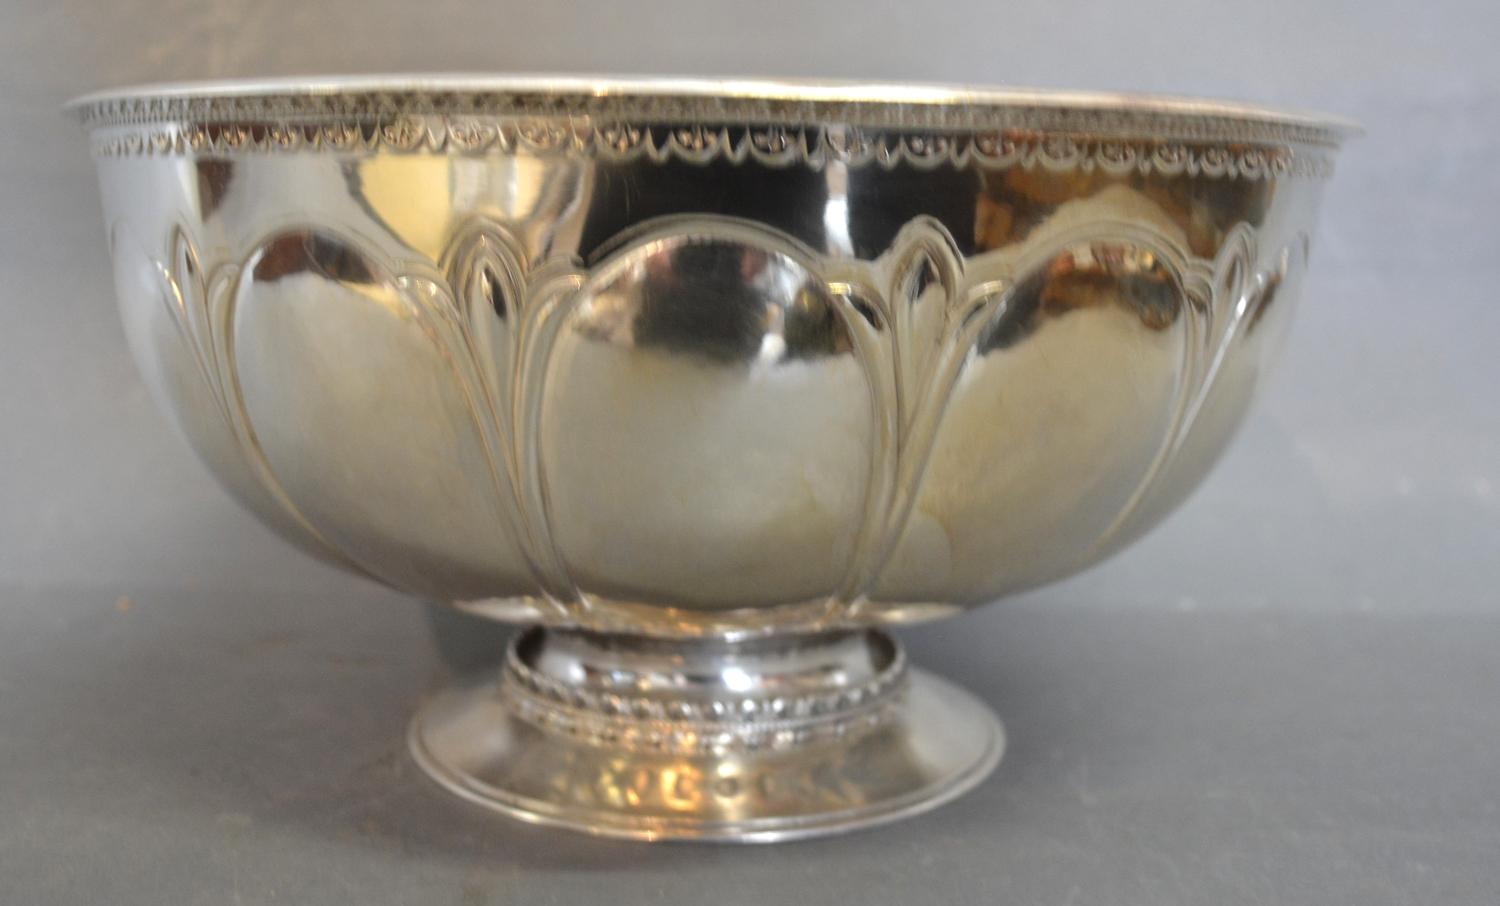 Guild of Handicraft A Large Silver Pedestal Bowl with stylised decoration, London 1930, retailed - Image 2 of 3